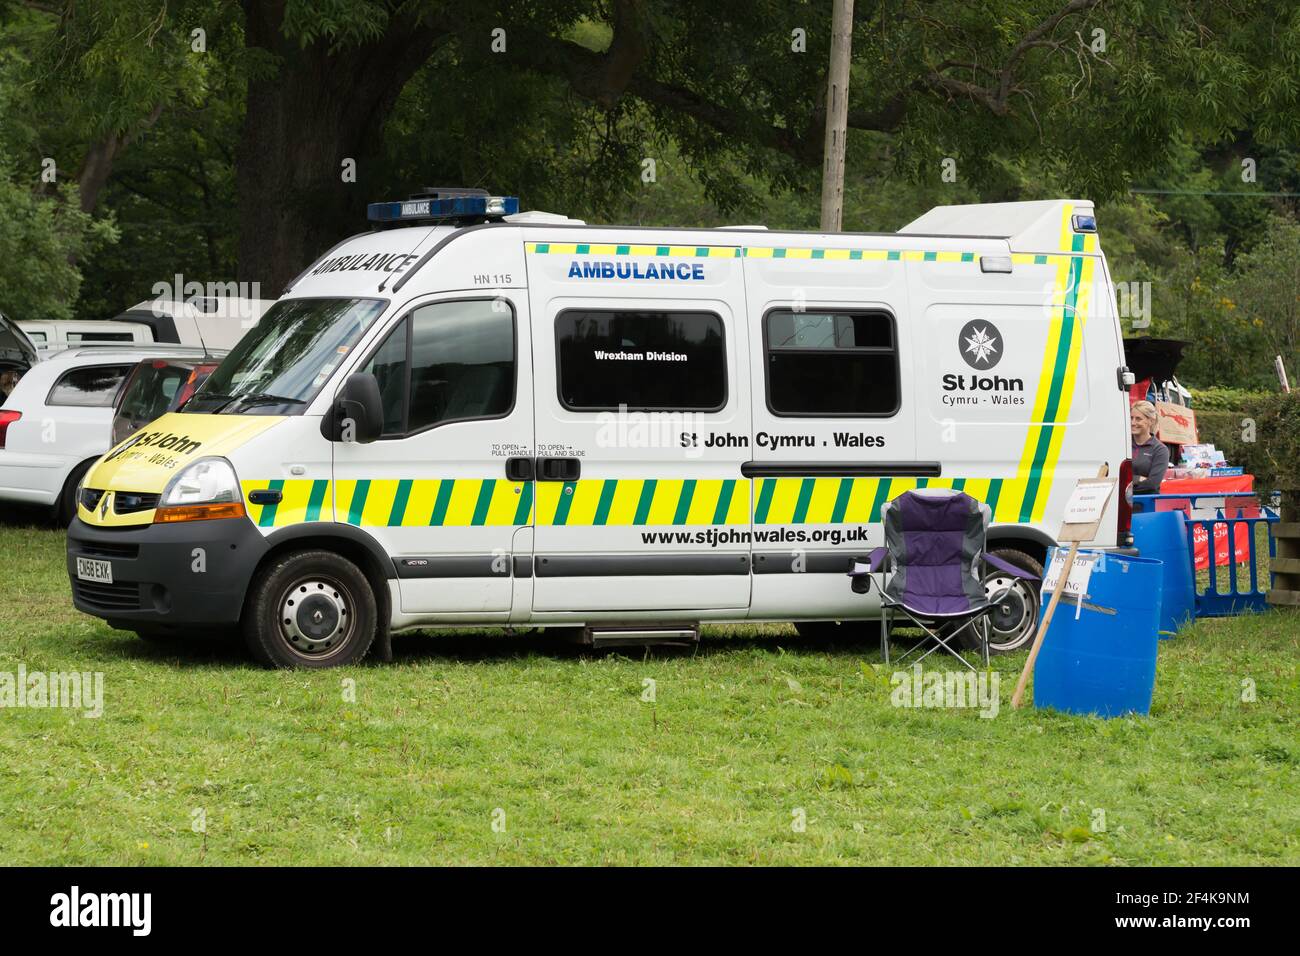 Saint John Ambulance vehicle a charity made up of volunteer medical staff that provides first aid and emergency medical support at events Stock Photo